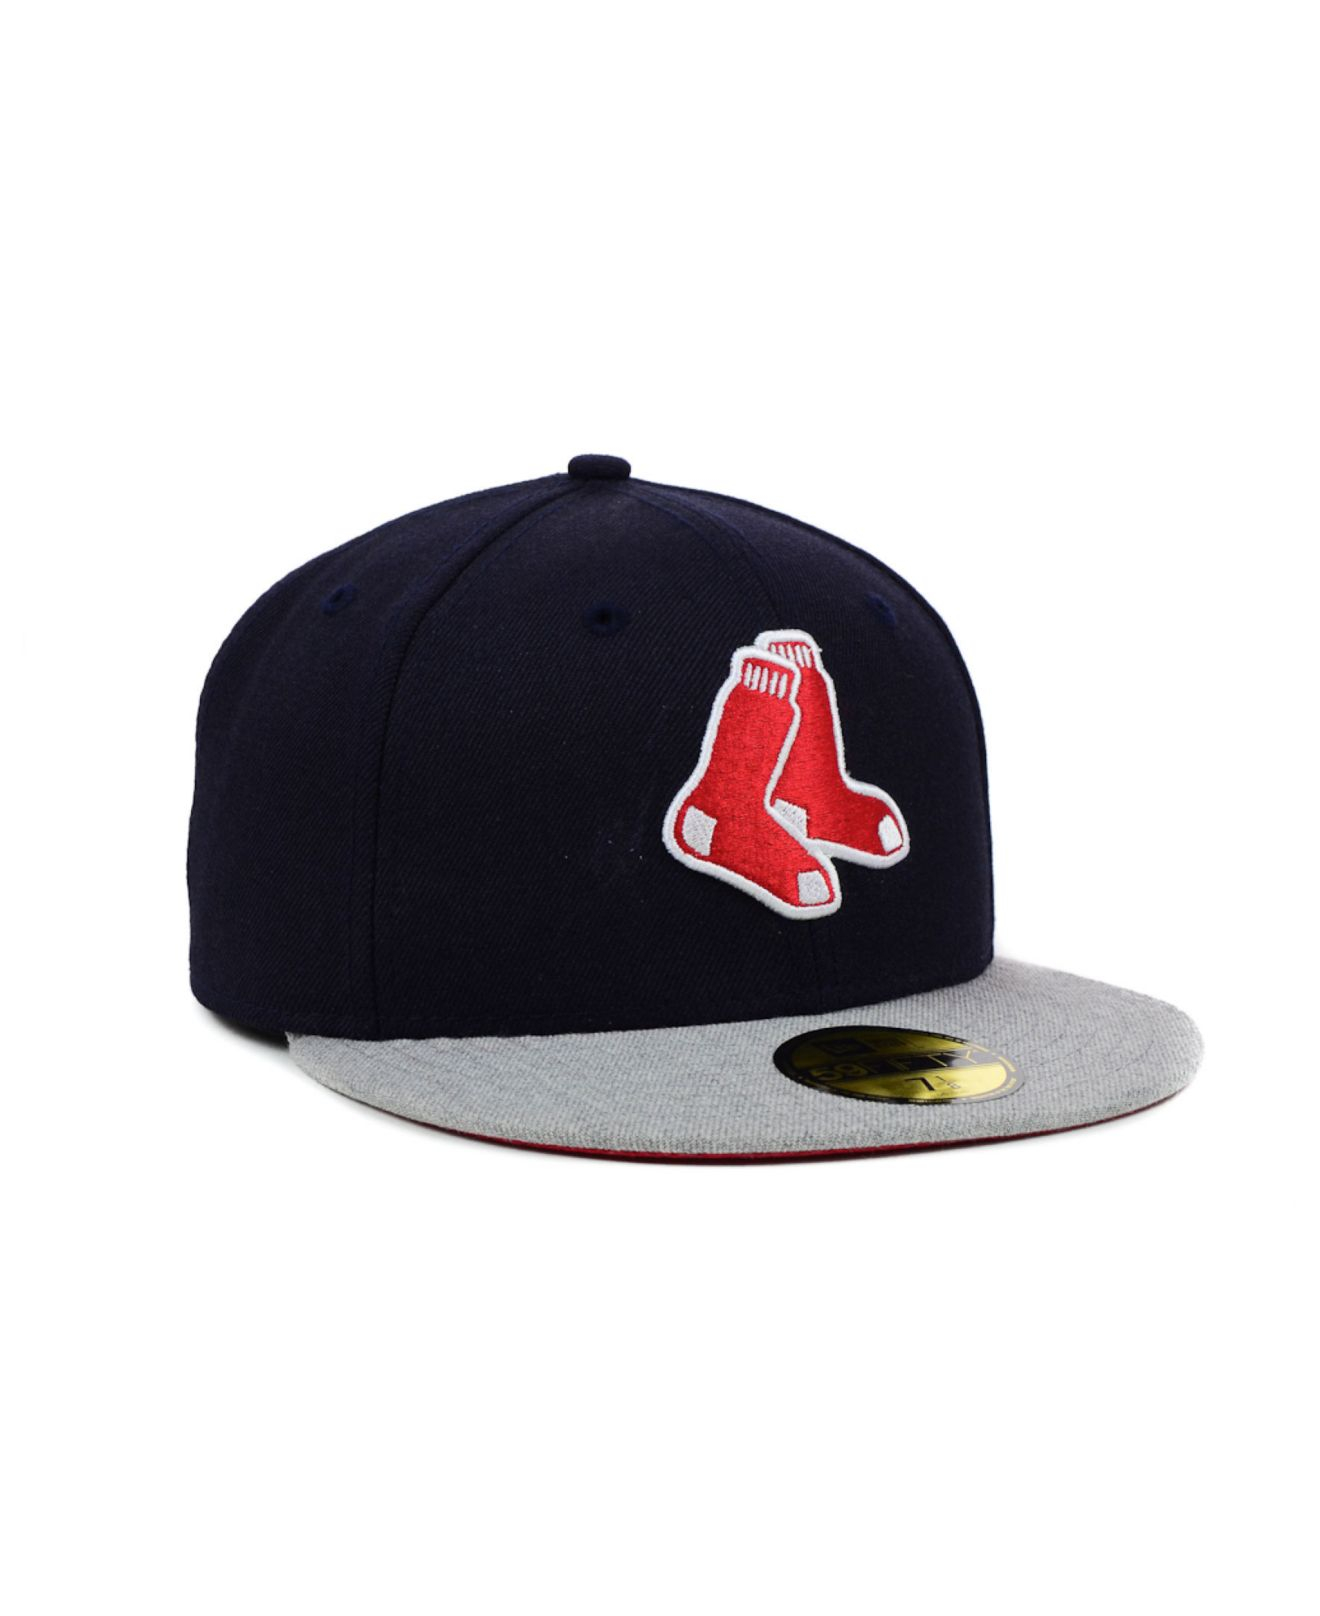 Lyst - Ktz Boston Red Sox Mlb Team Heather 59fifty Cap in Blue for Men